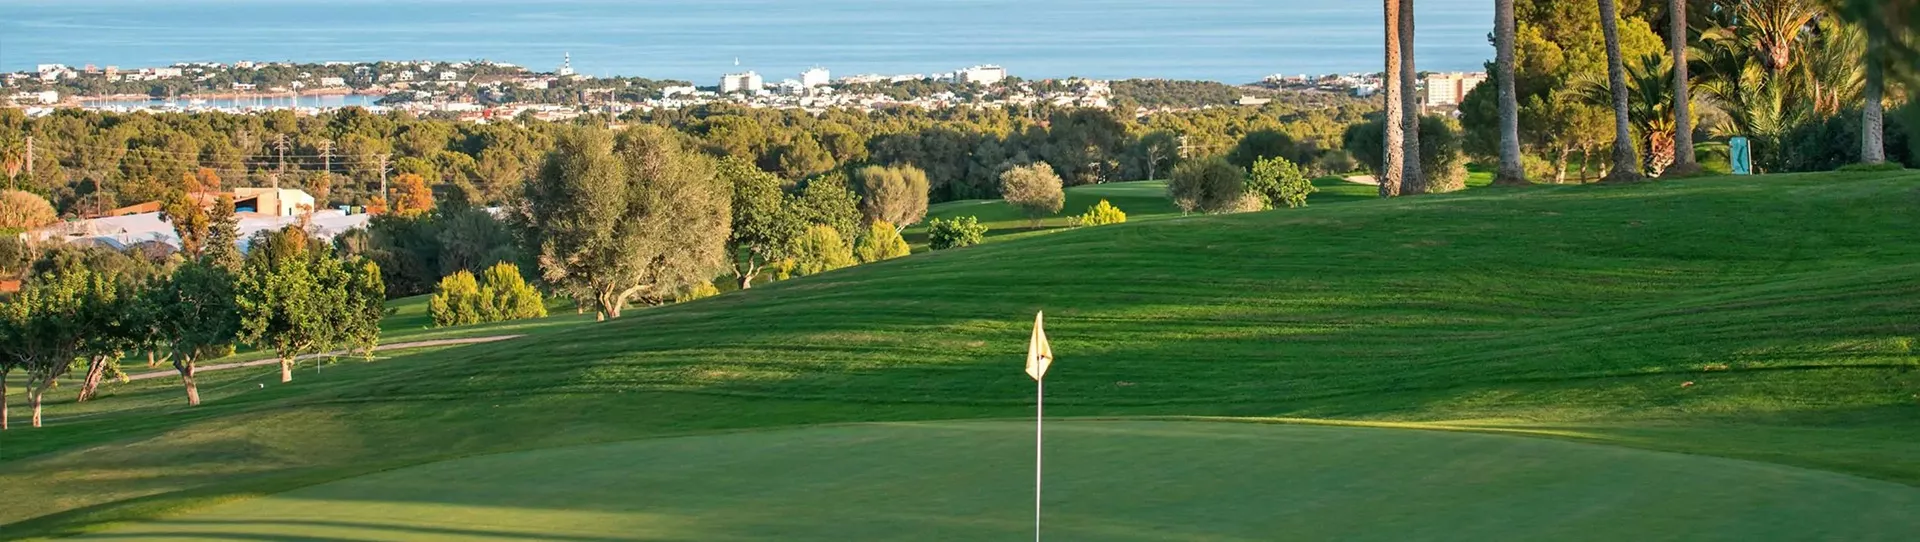 Spain golf courses - Vall D'Or Golf Course - Photo 1